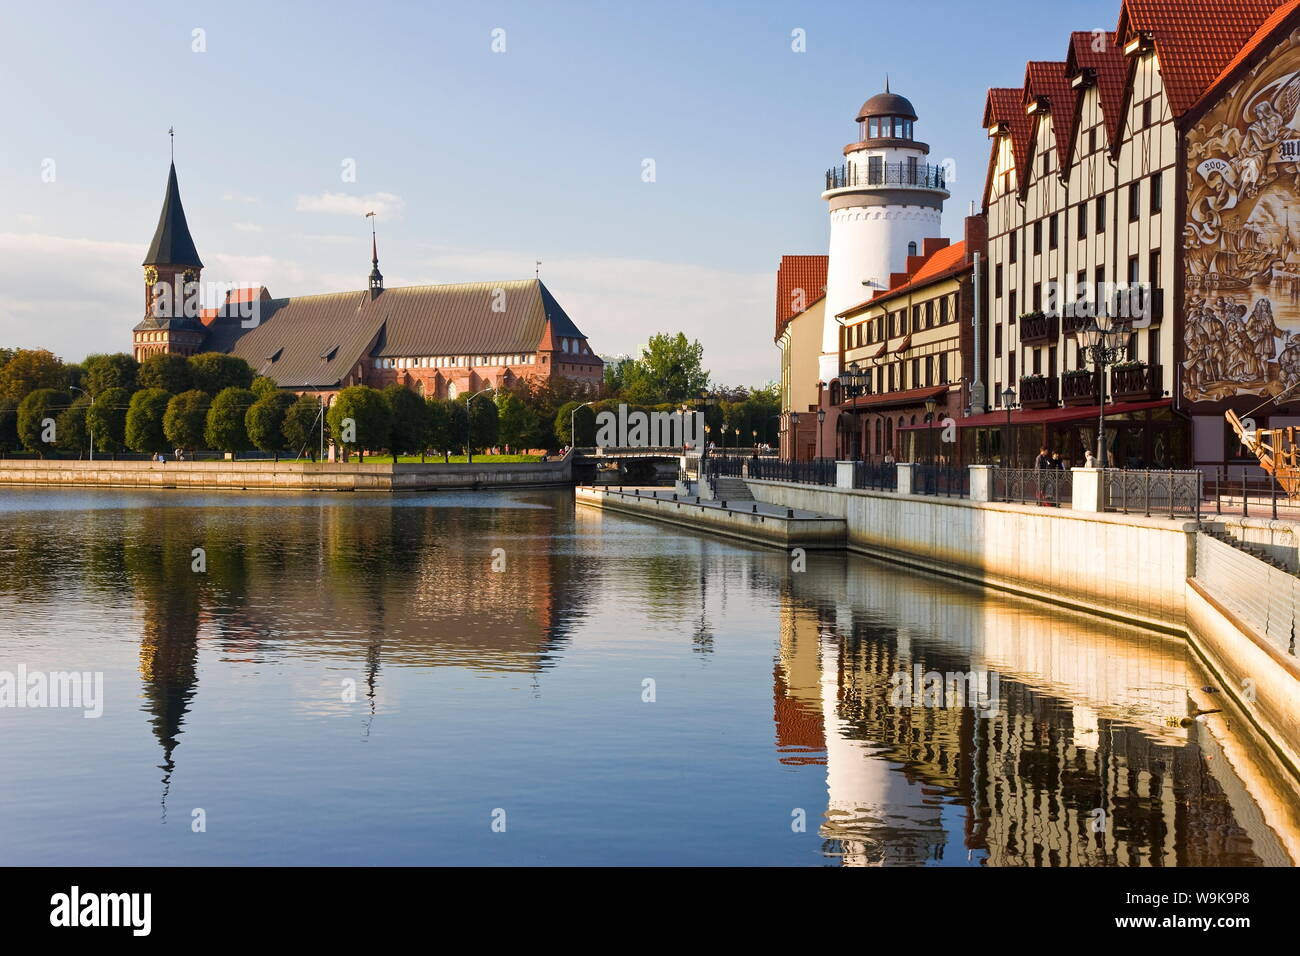 Cathedral and Fish Village, a modern housing, hotel and restaurant development, Kaliningrad (Konigsberg), Russia, Europe Stock Photo